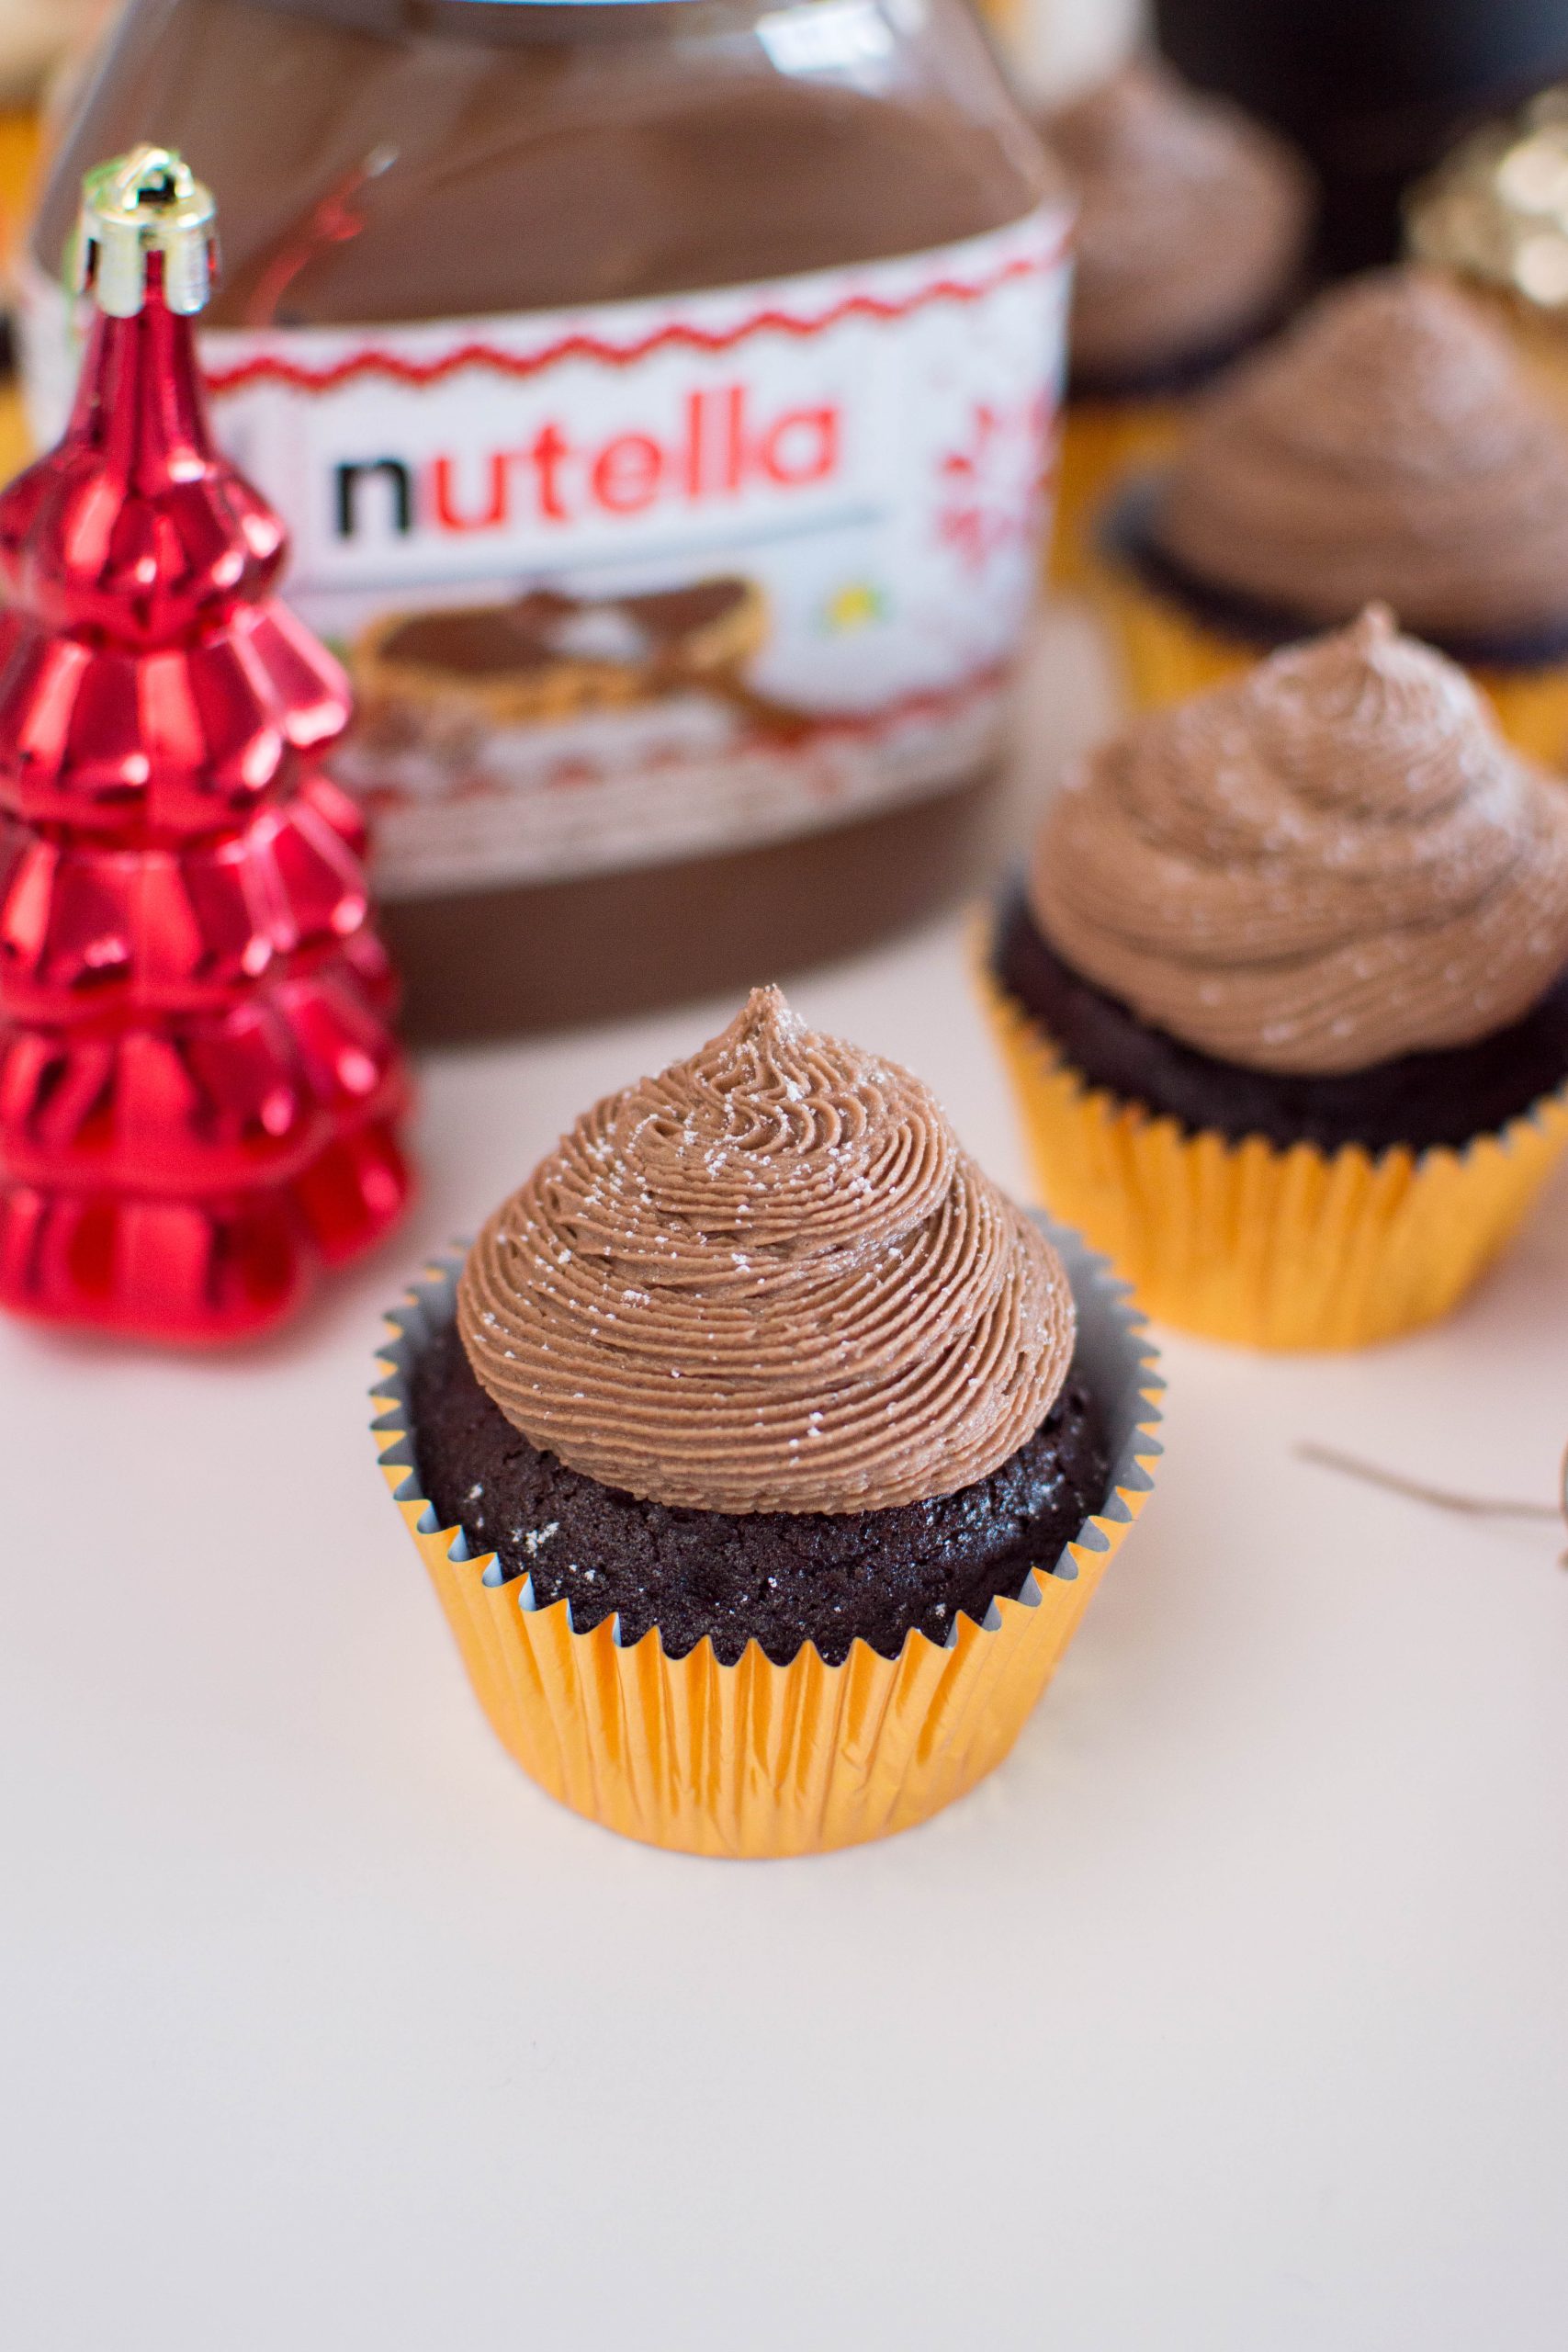 Step-up your cupcake game by topping it with fresh, homemade Nutella Buttercream. It only takes a few minutes to whip-up and is absolutely mouthwatering!